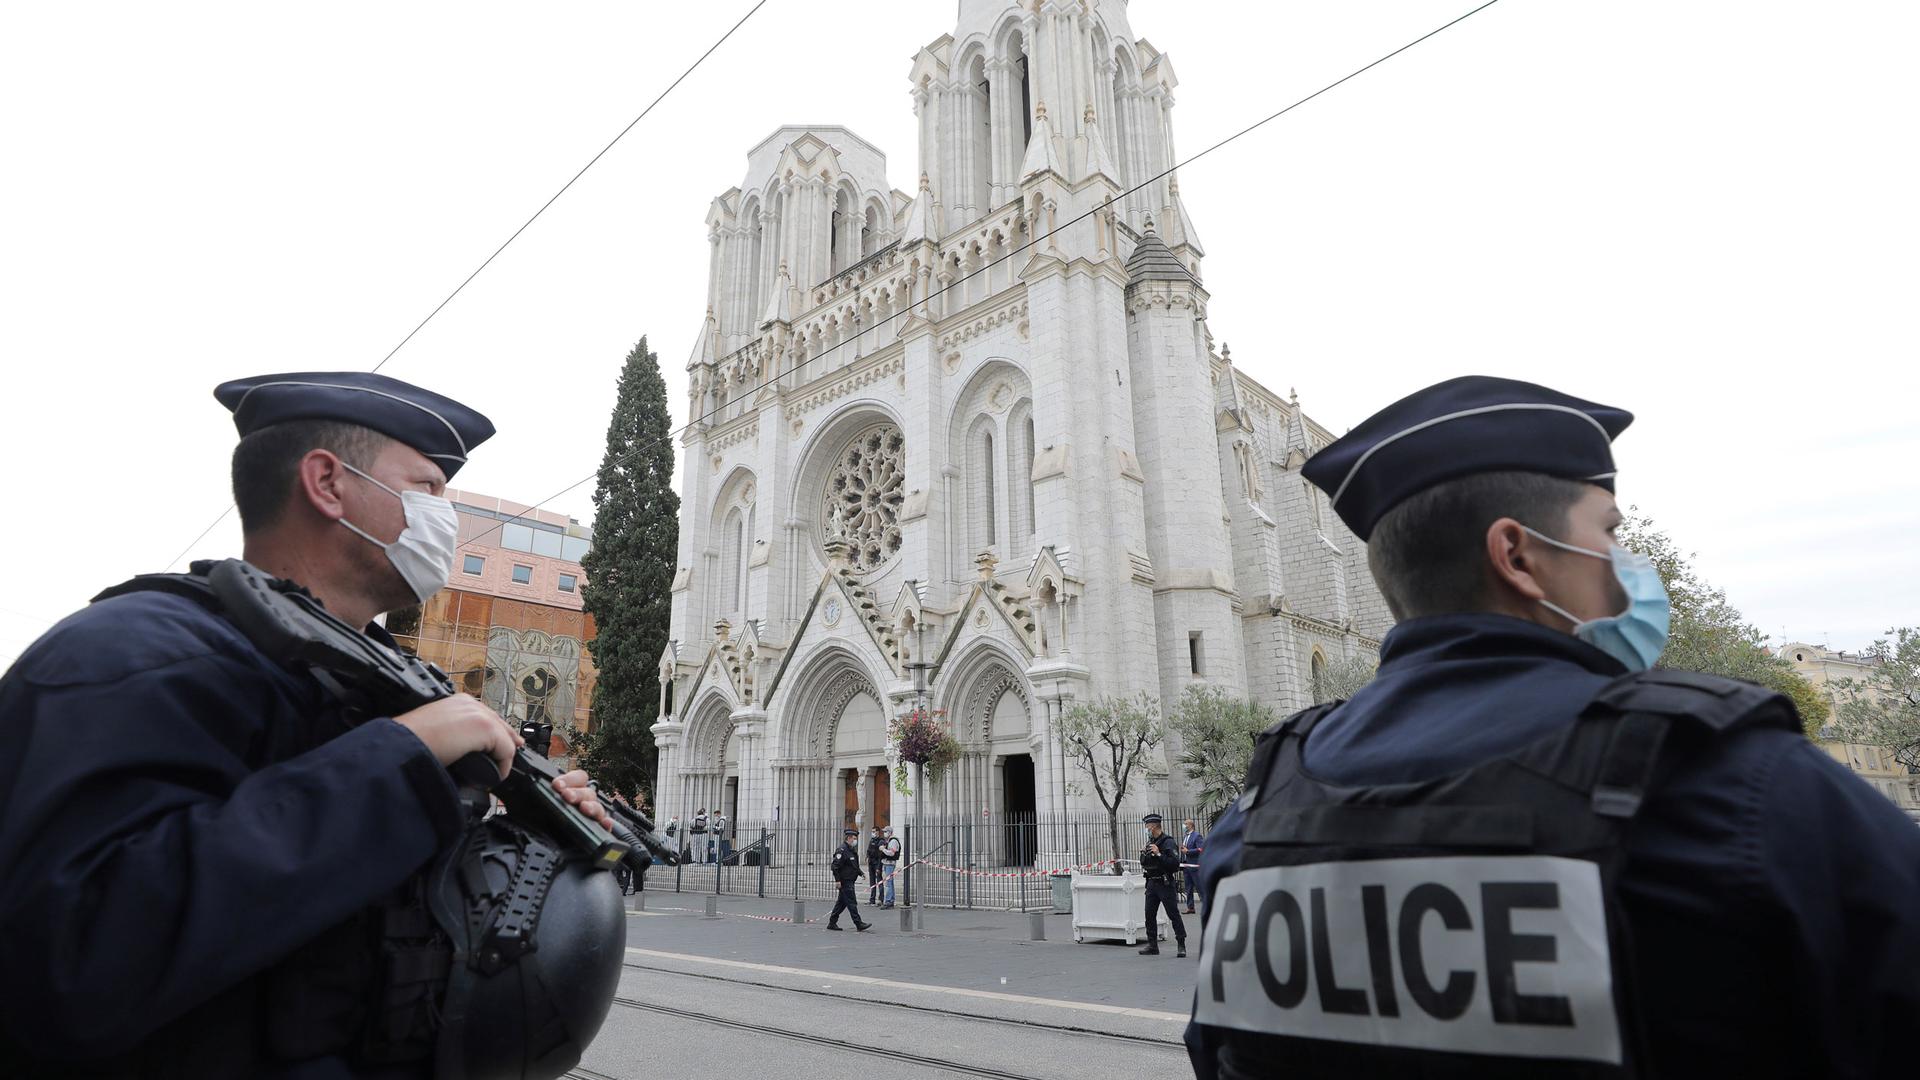 Police officers are shown standing guard across the street and holding large guns from the Notre Dame church in Nice.